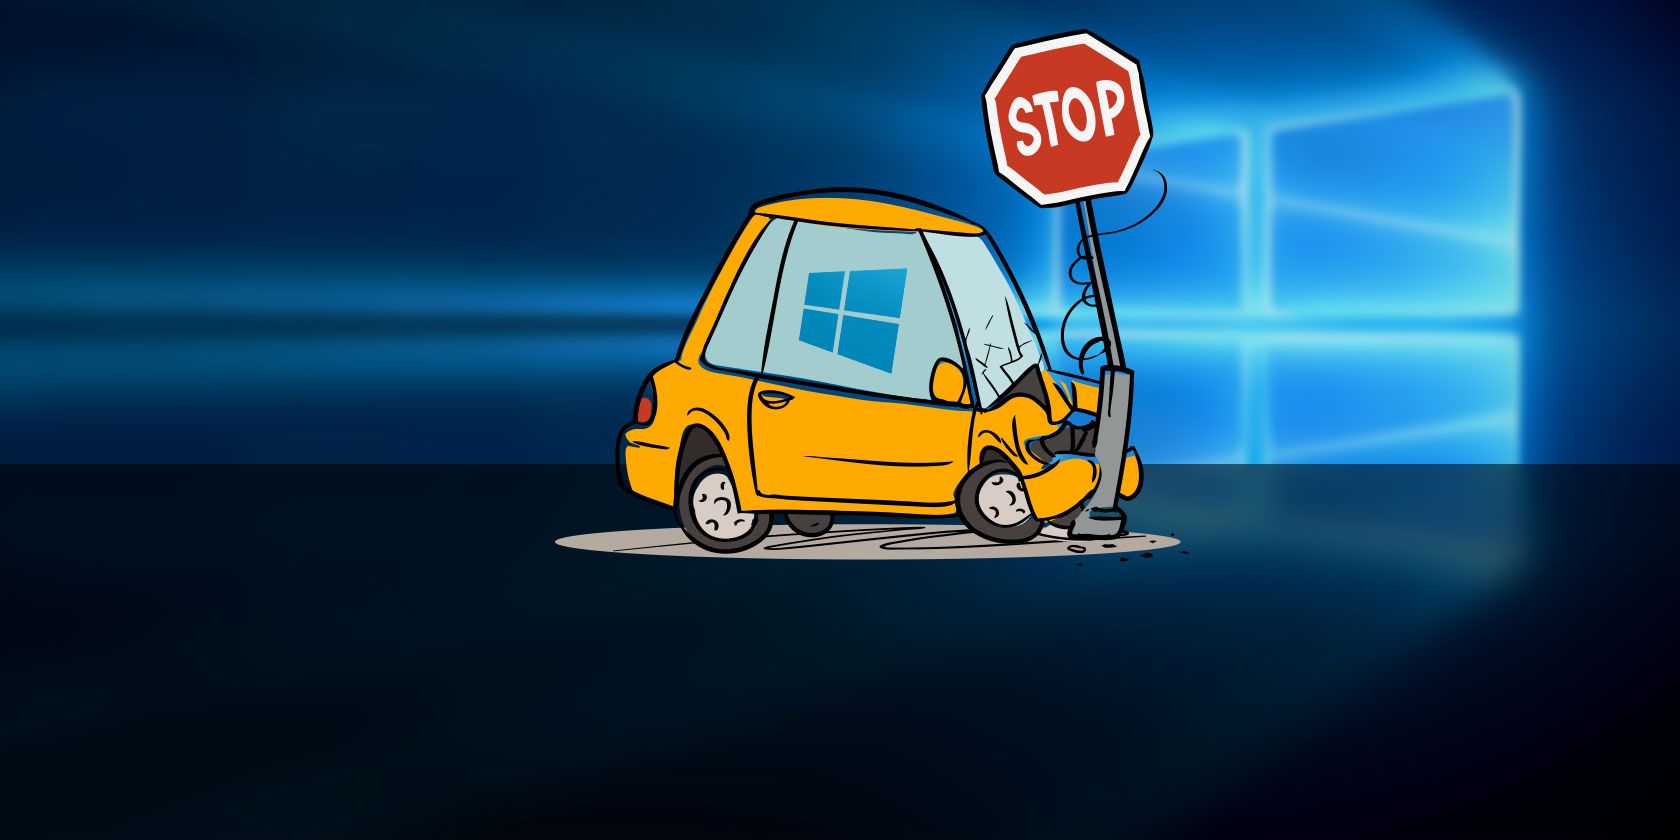 Critical Process Died in Windows 10? How to Fix This Stop Code